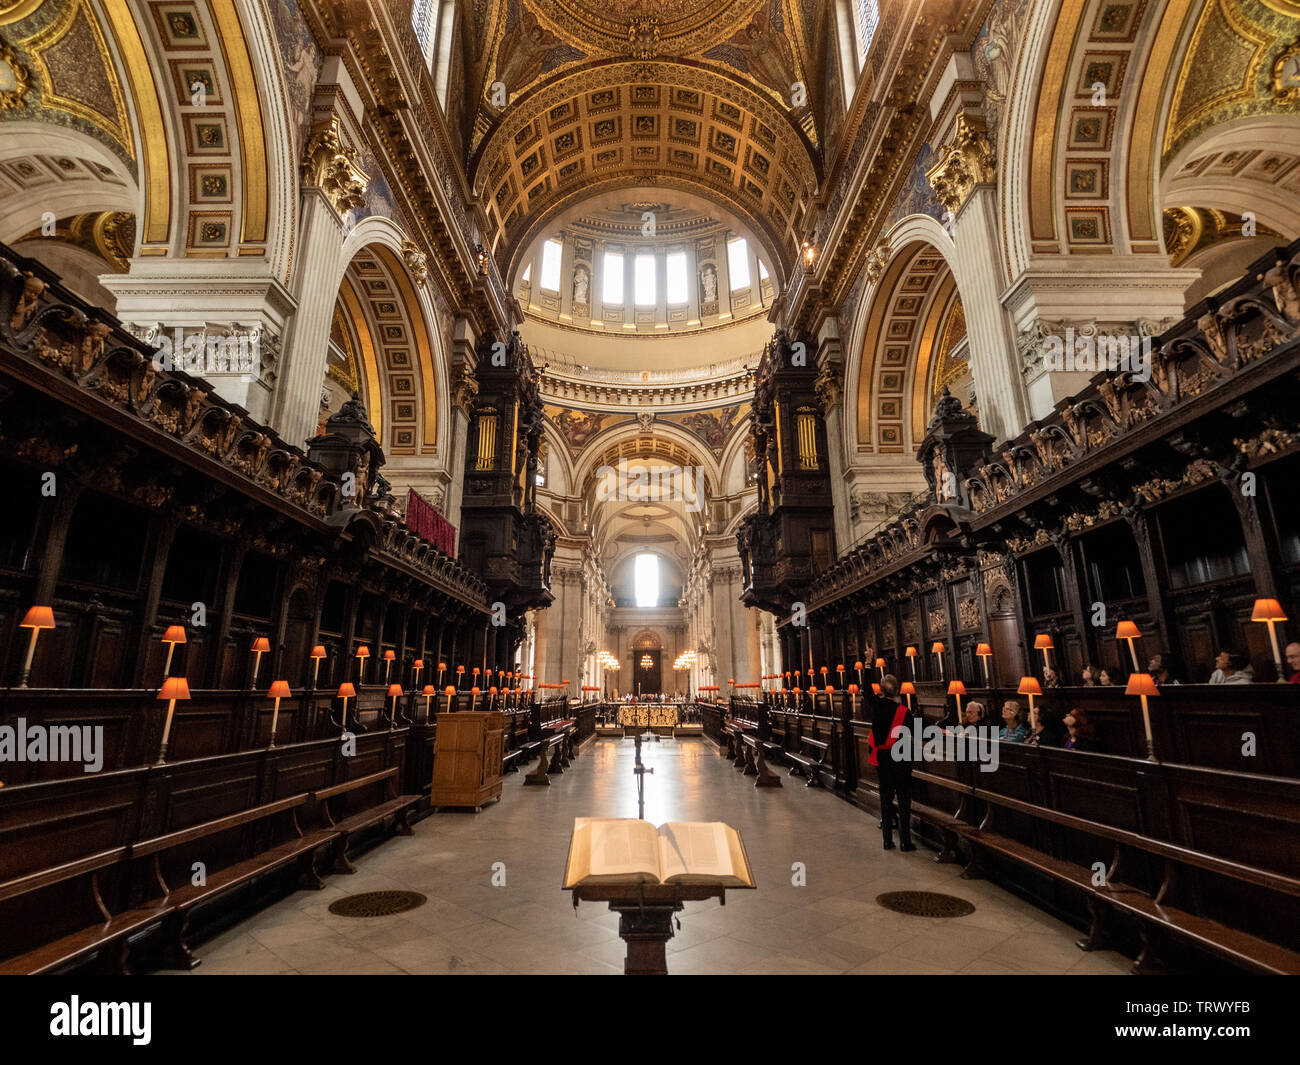 Interior of St. Pauls Cathedral, London, England Stock Photo